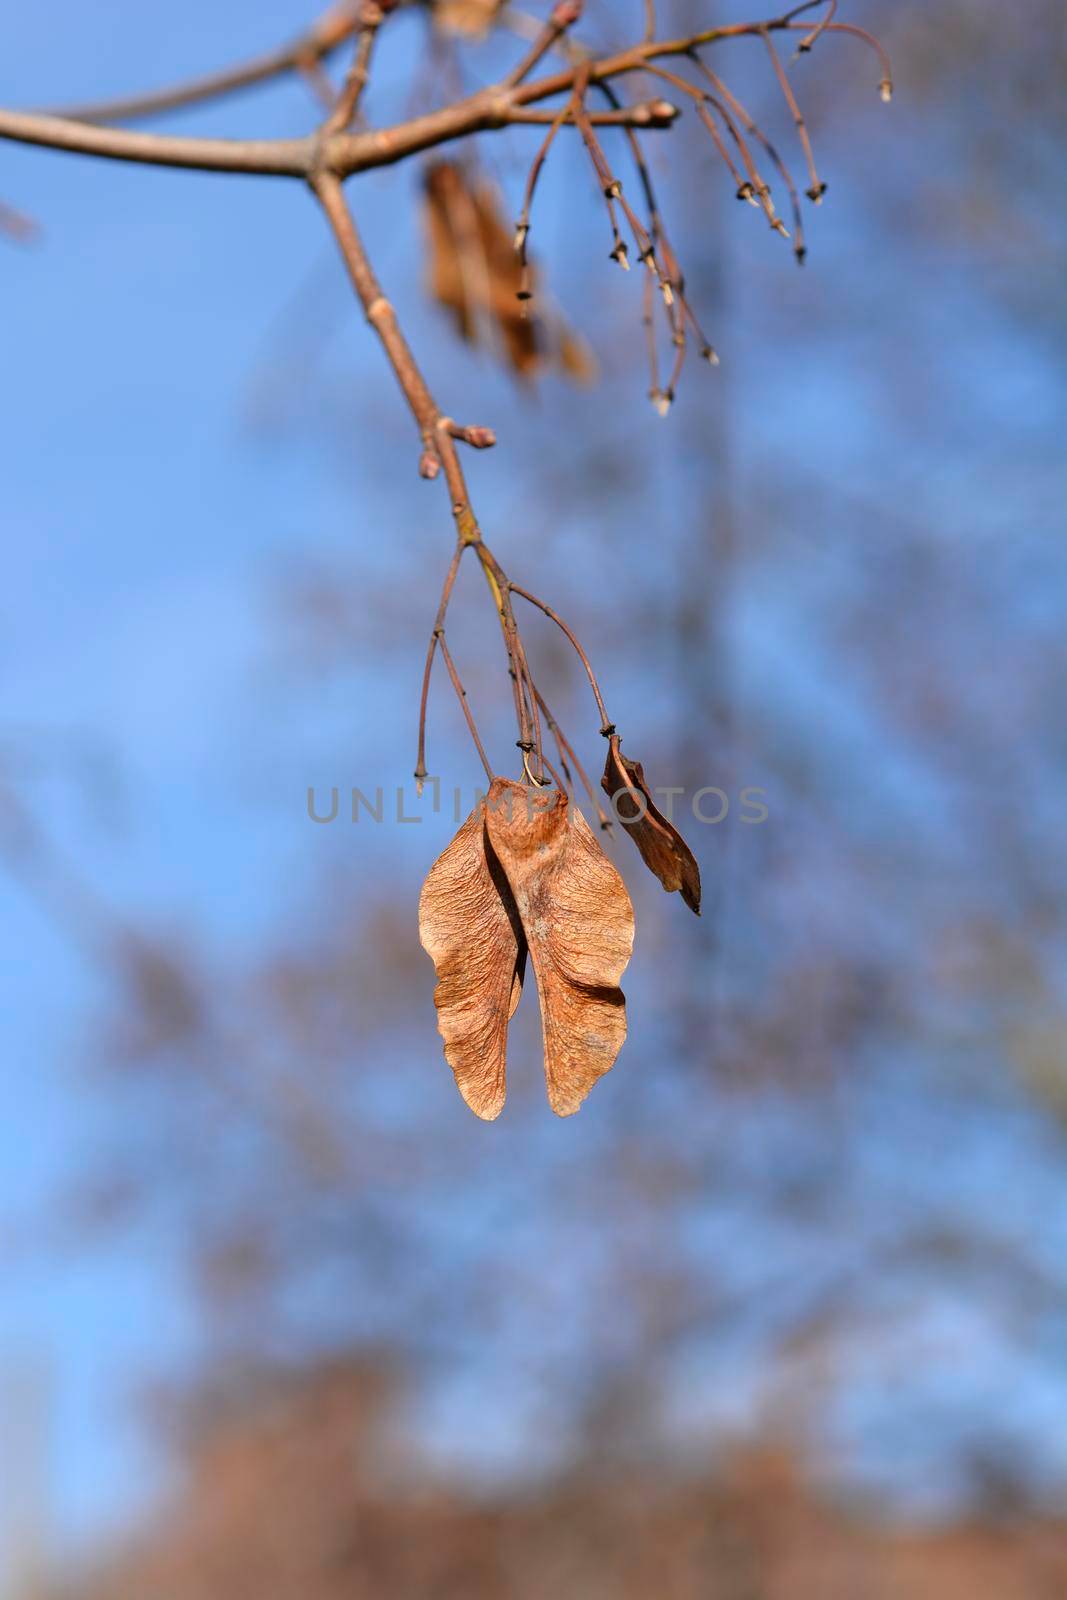 Norway maple seeds on branches - Latin name - Acer platanoides